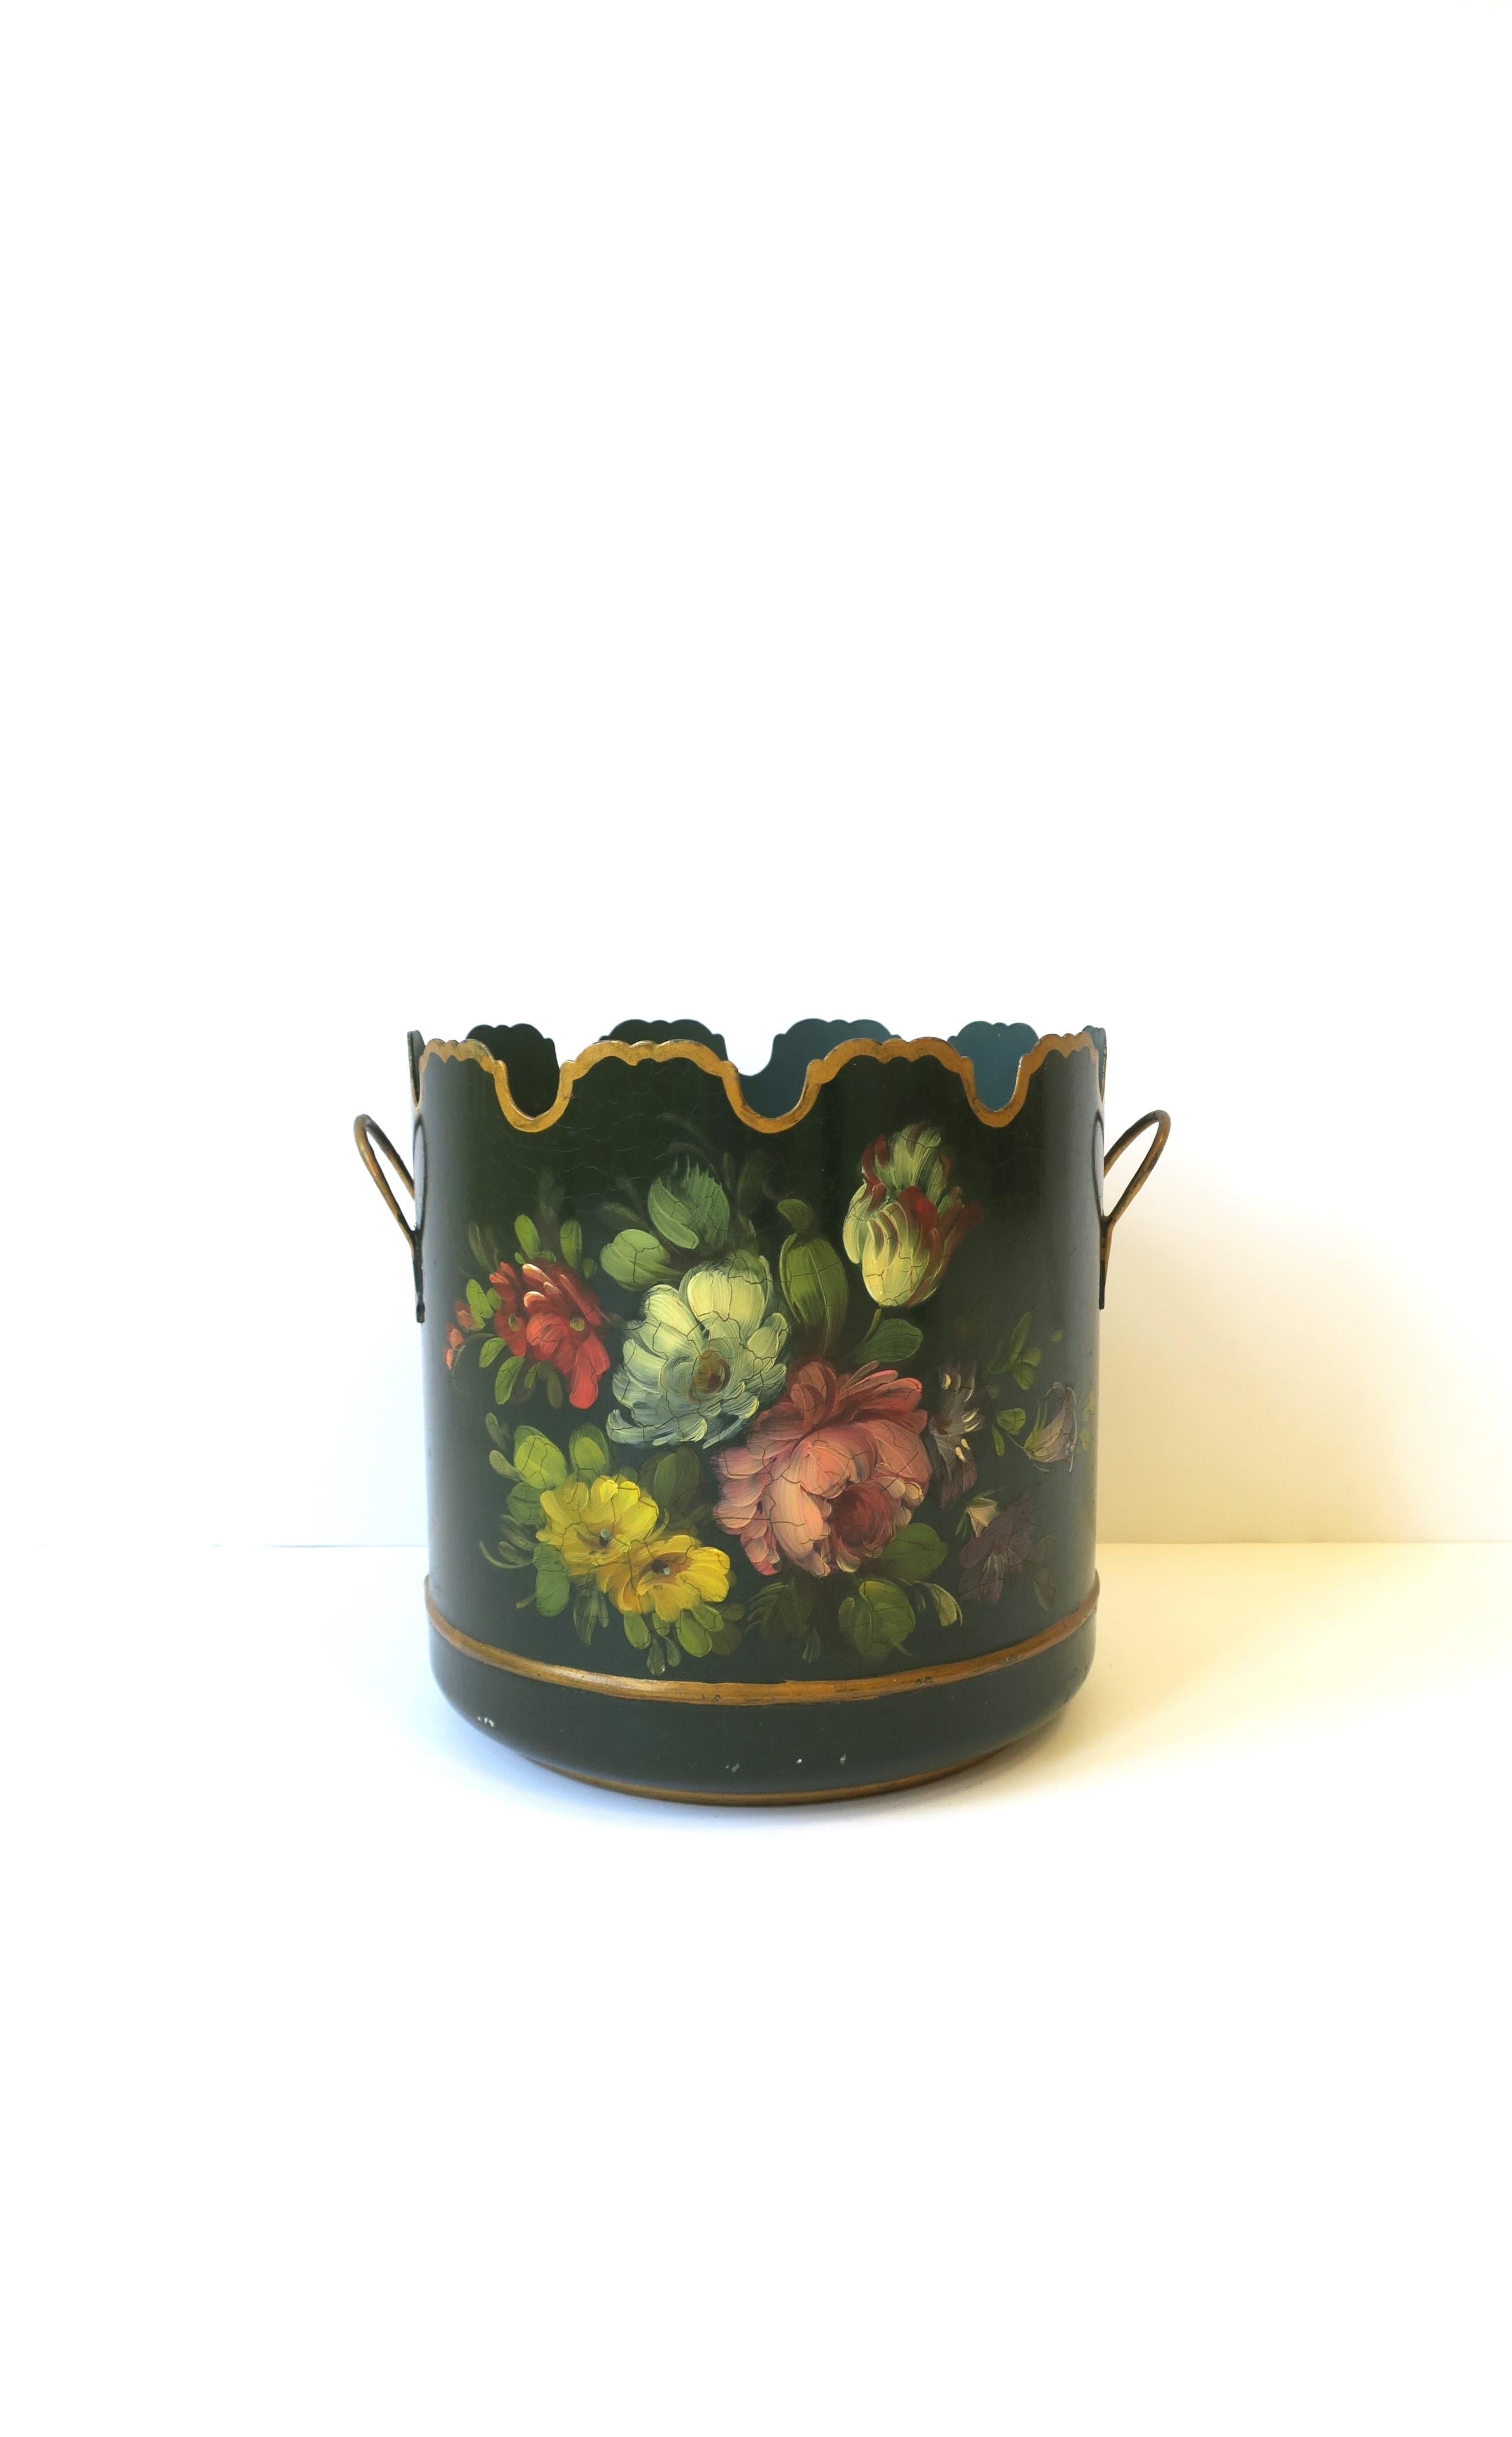 A French Tôle dark green and gold Jardinière Cachepot with hand-painted floral design and scalloped edge, circa early-20th century, France. Piece, dark green, has hand-painted floral design on front, gold scalloped edge around, handles with gold